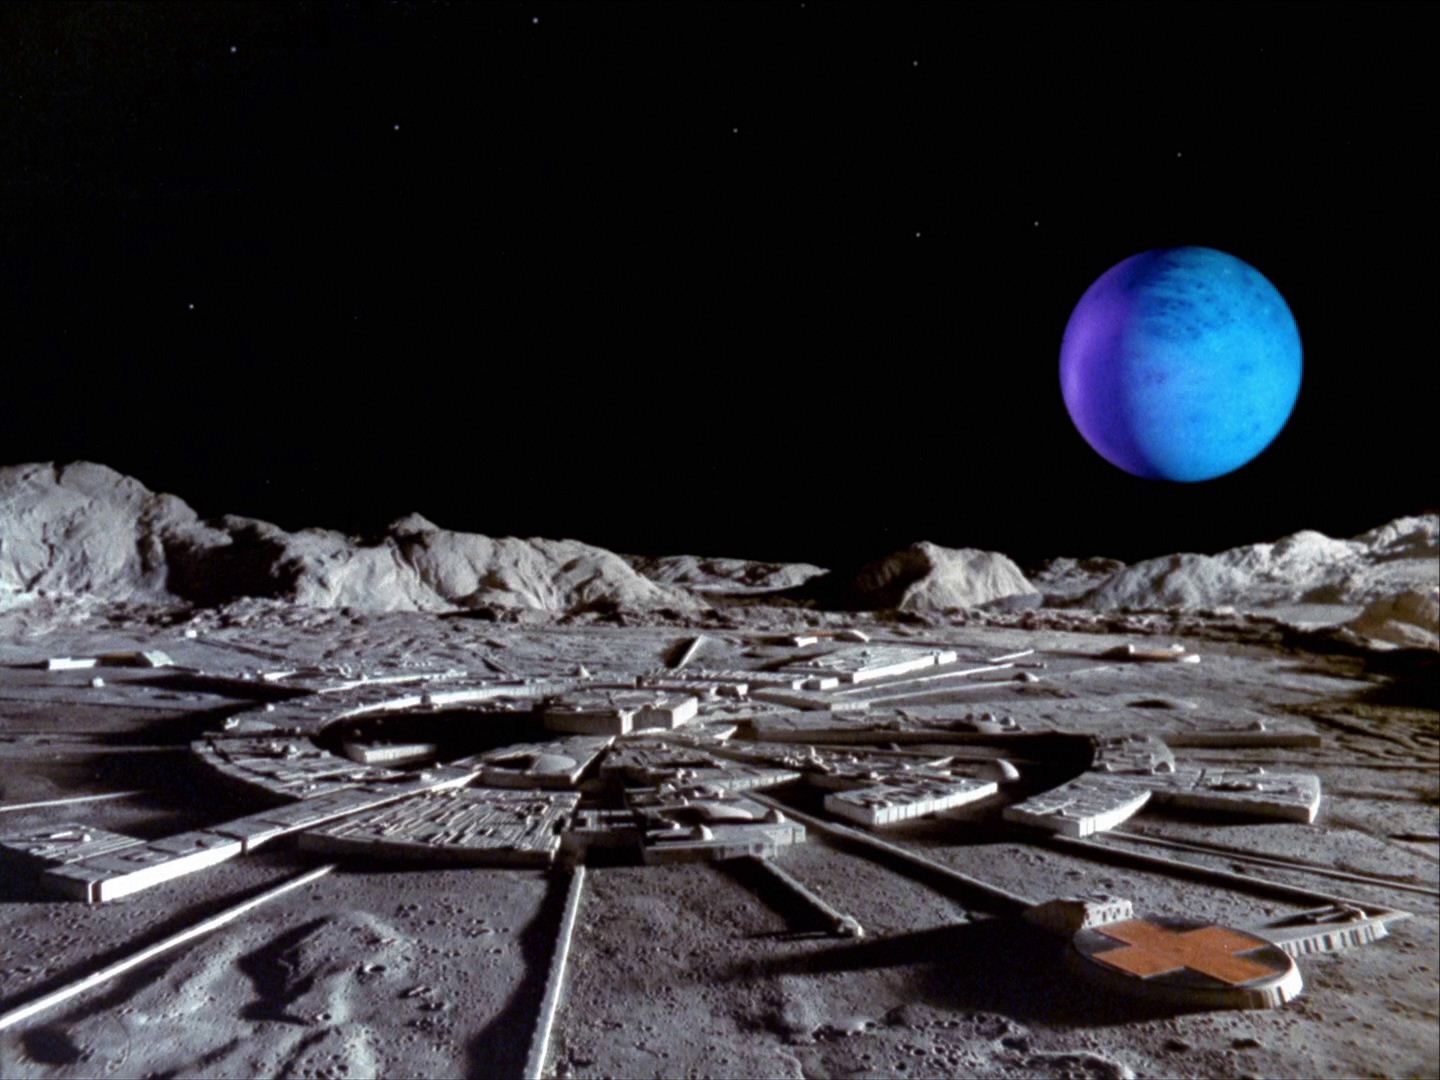 Researchers announce that a manned moon base could begin construction in 5 years